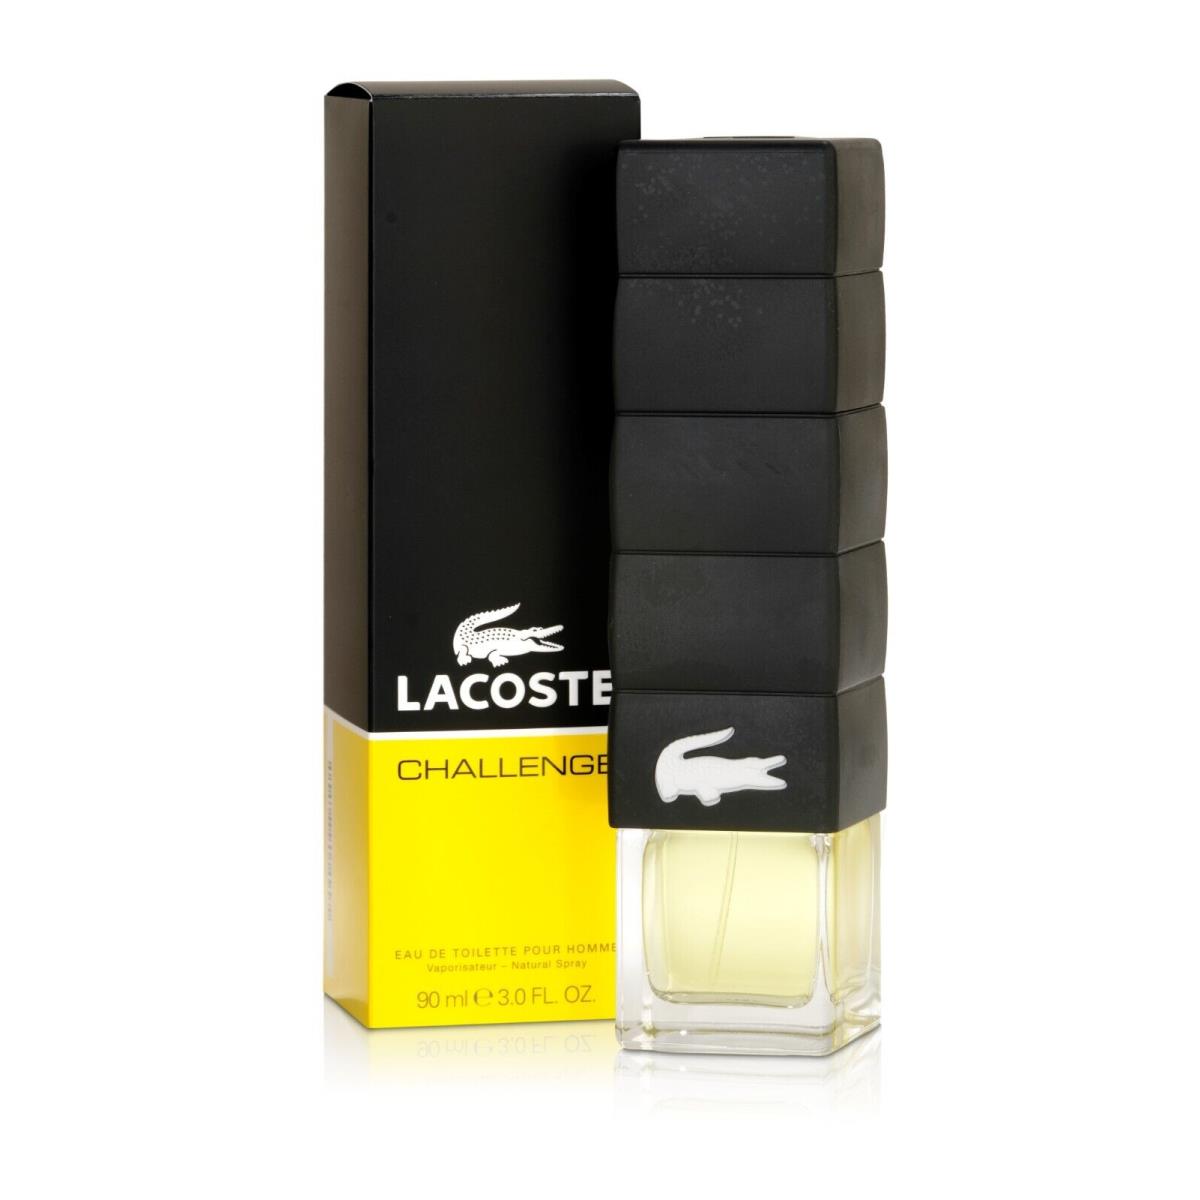 Challenge by Lacoste For Men Edt Pour Homme 3.0 FL OZ / 90 ML Natural Spray Nlb